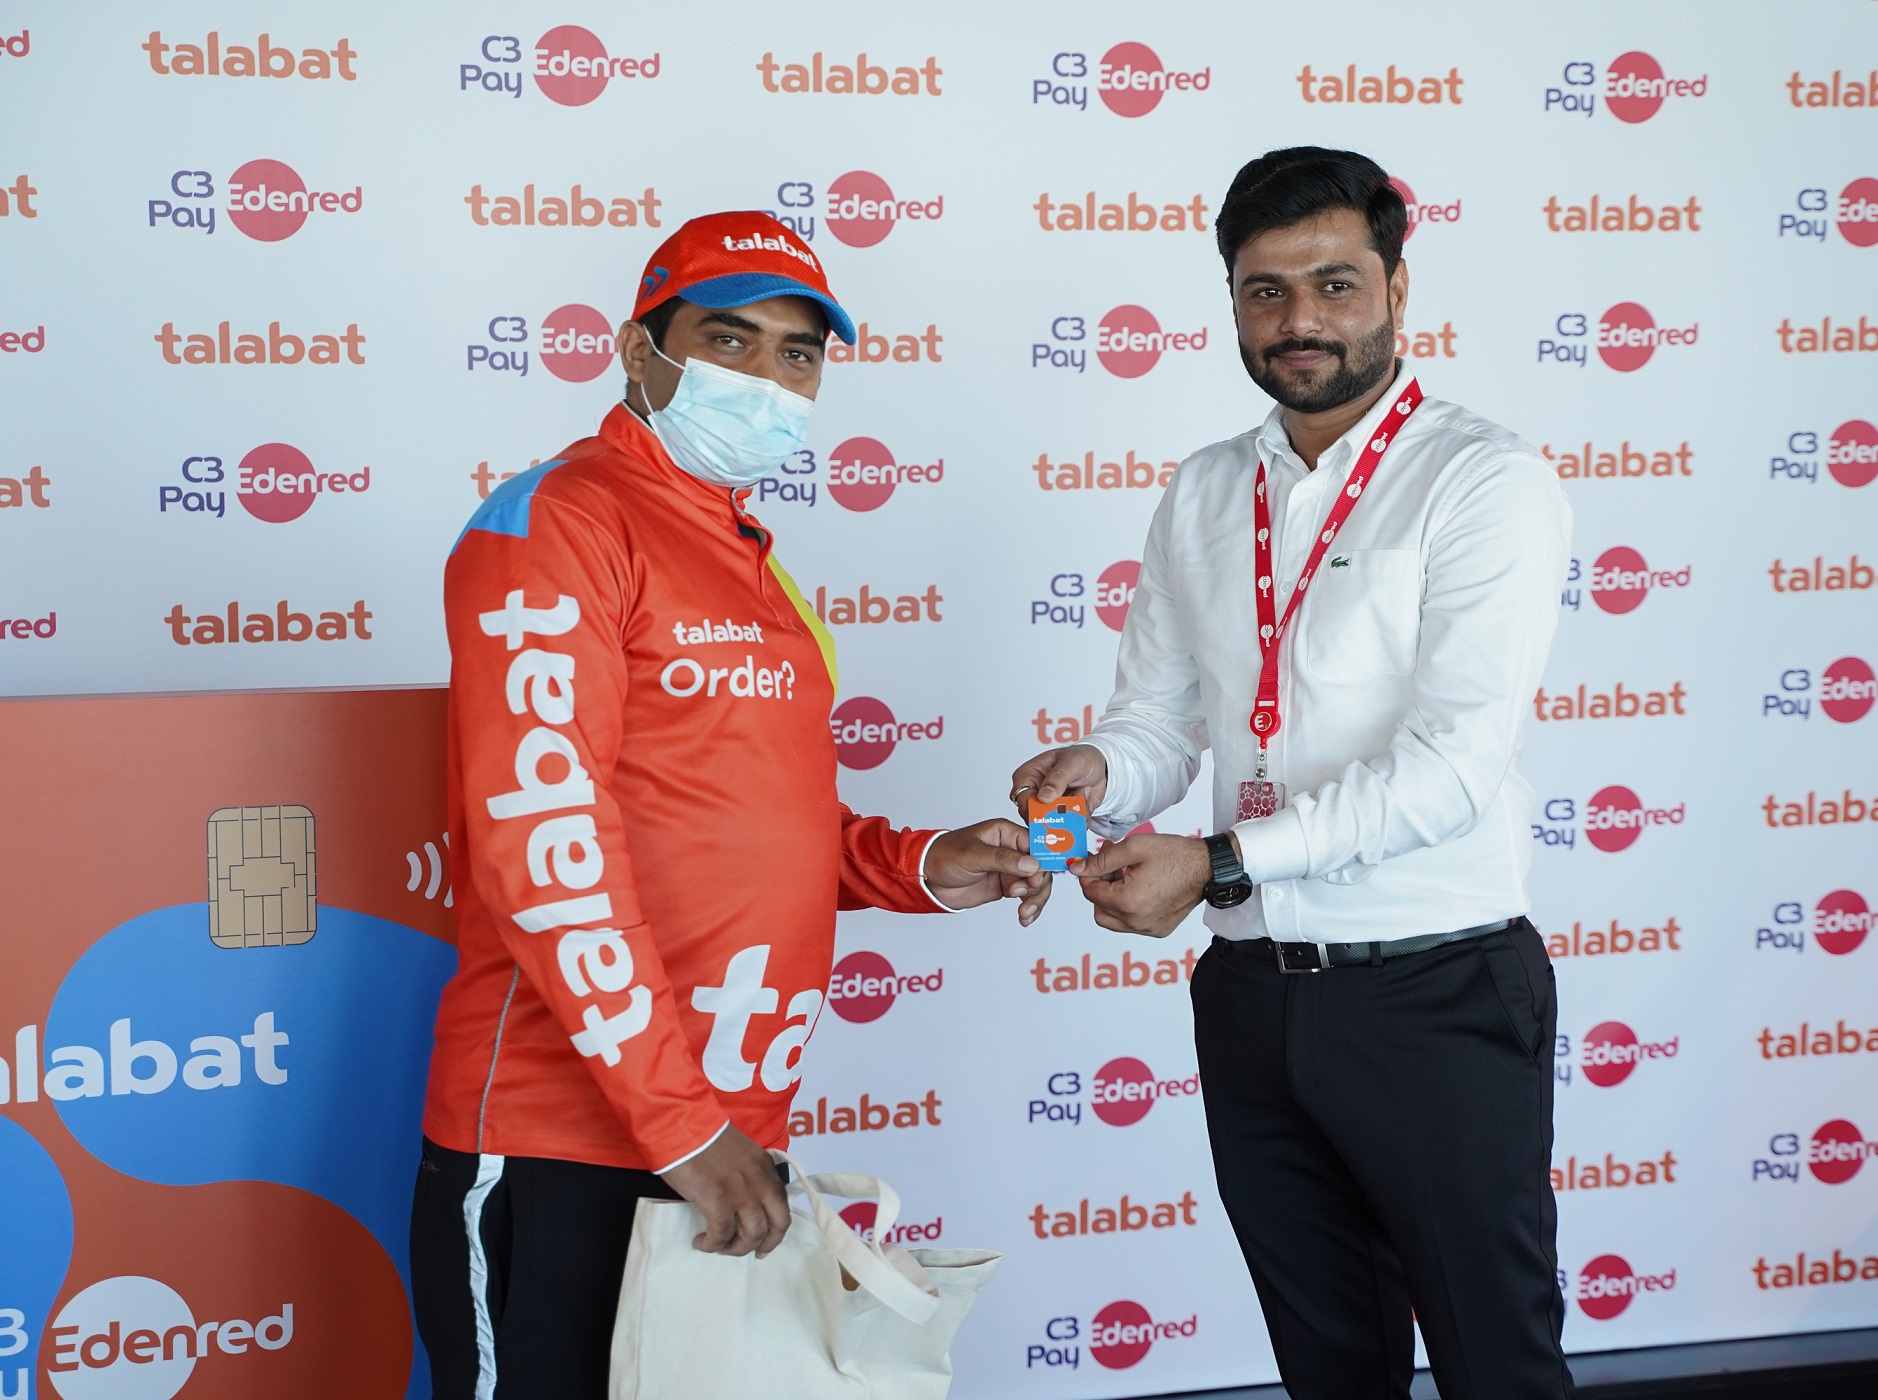 Edenred offers C3Pay payroll cards with talabat’s support to over 15,000 riders in the UAE